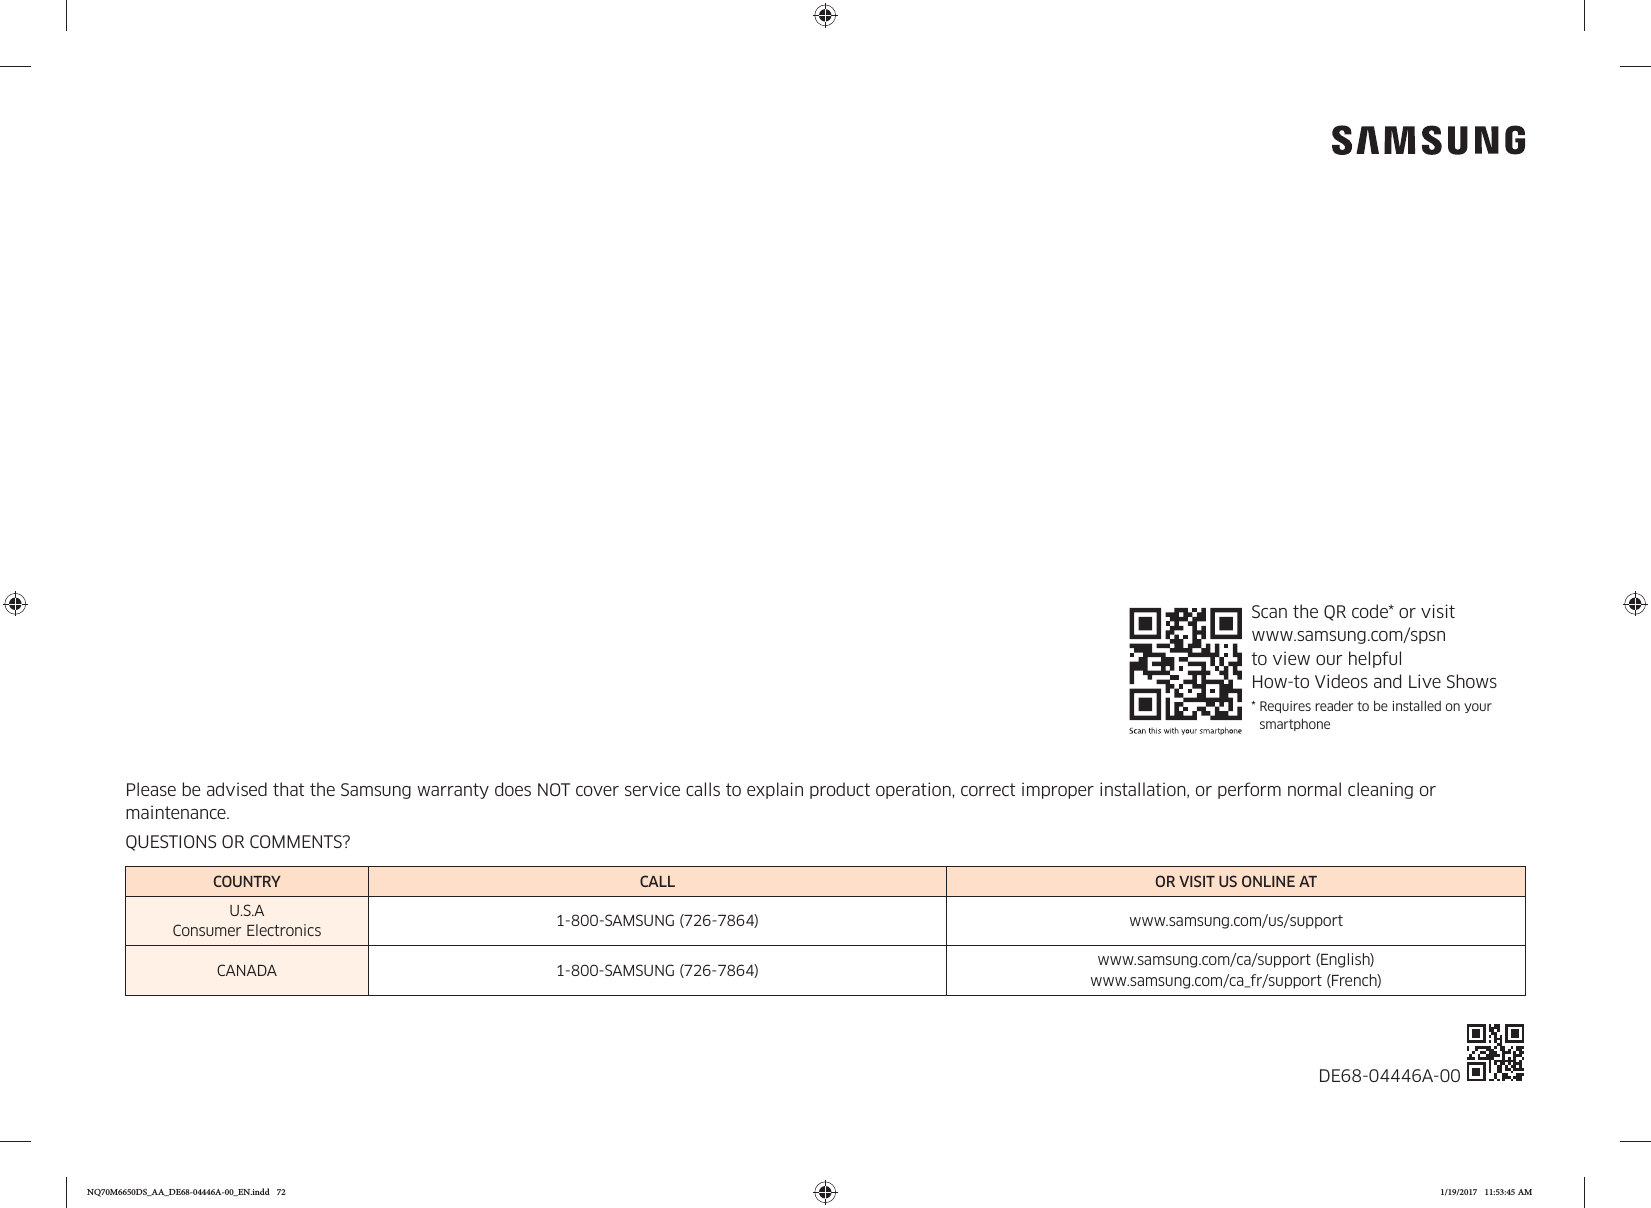 Please be advised that the Samsung warranty does NOT cover service calls to explain product operation, correct improper installation, or perform normal cleaning or maintenance.QUESTIONS OR COMMENTS?COUNTRY CALL OR VISIT US ONLINE ATU.S.A Consumer Electronics 1-800-SAMSUNG (726-7864) www.samsung.com/us/supportCANADA 1-800-SAMSUNG (726-7864) www.samsung.com/ca/support (English) www.samsung.com/ca_fr/support (French)DE68-04446A-00 Scan the QR code* or visit  www.samsung.com/spsn  to view our helpful  How-to Videos and Live Shows*  Requires reader to be installed on your smartphoneNQ70M6650DS_AA_DE68-04446A-00_EN.indd   72 1/19/2017   11:53:45 AM